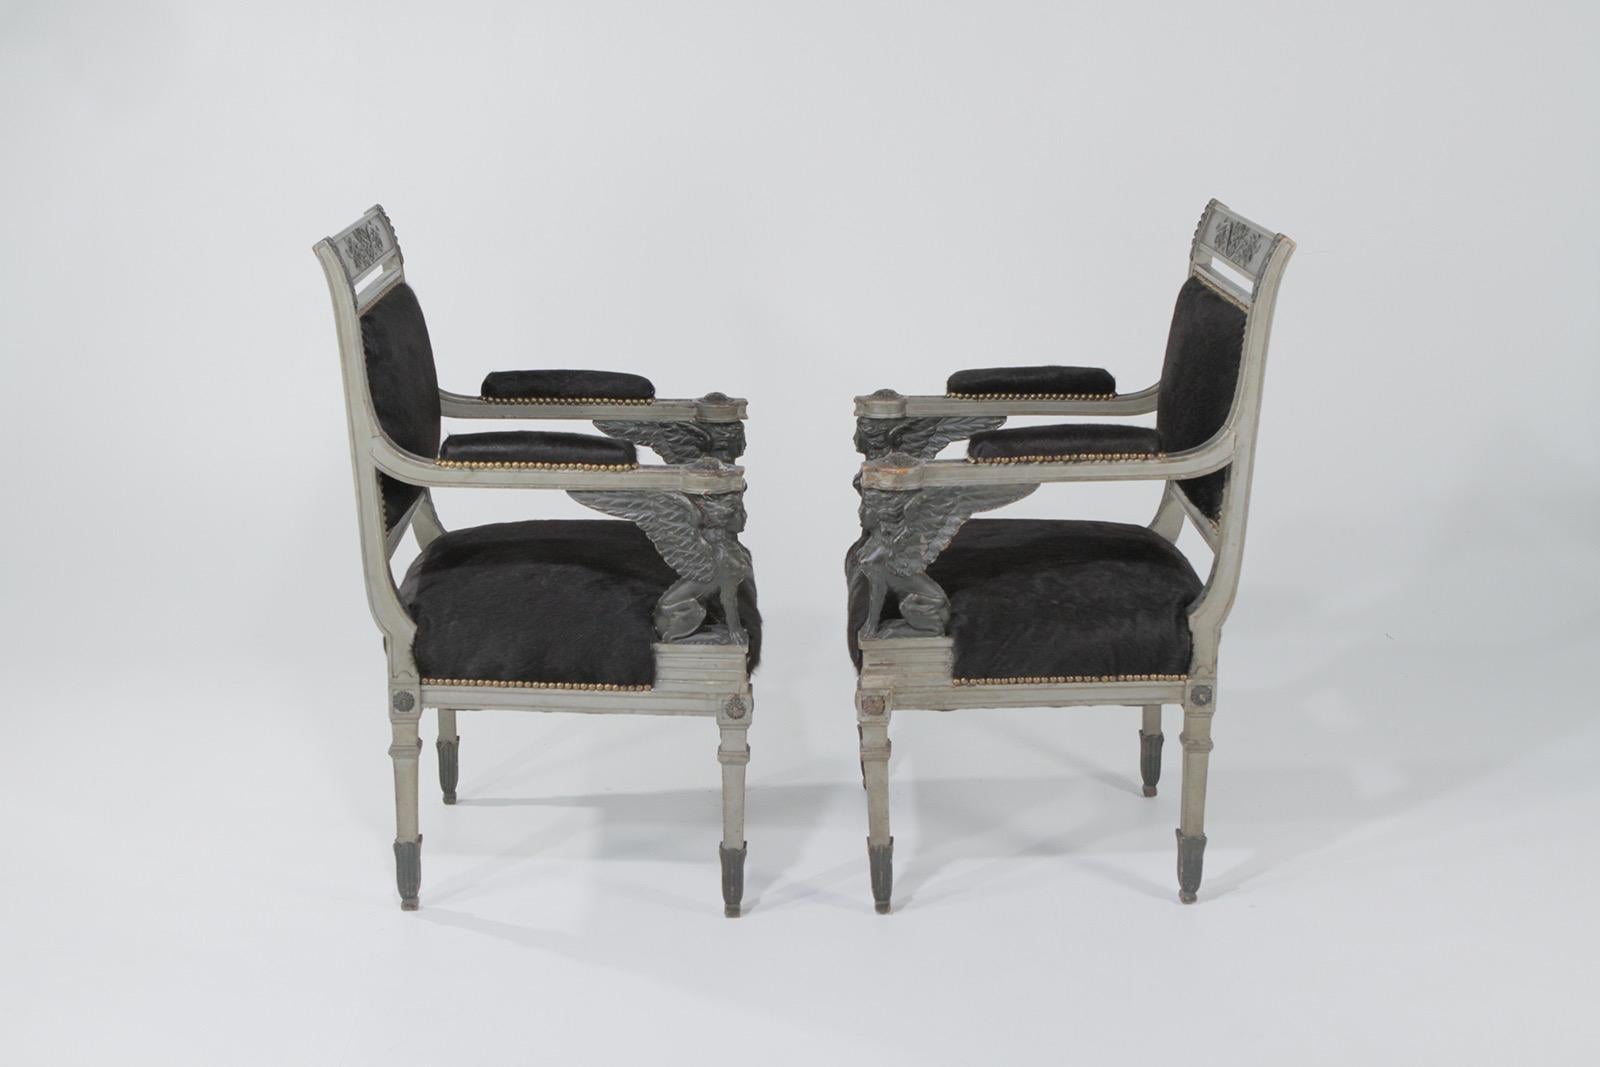 Superb Neoclassical Egyptian Revival Armchairs with Black Cowhide Upholstery 10